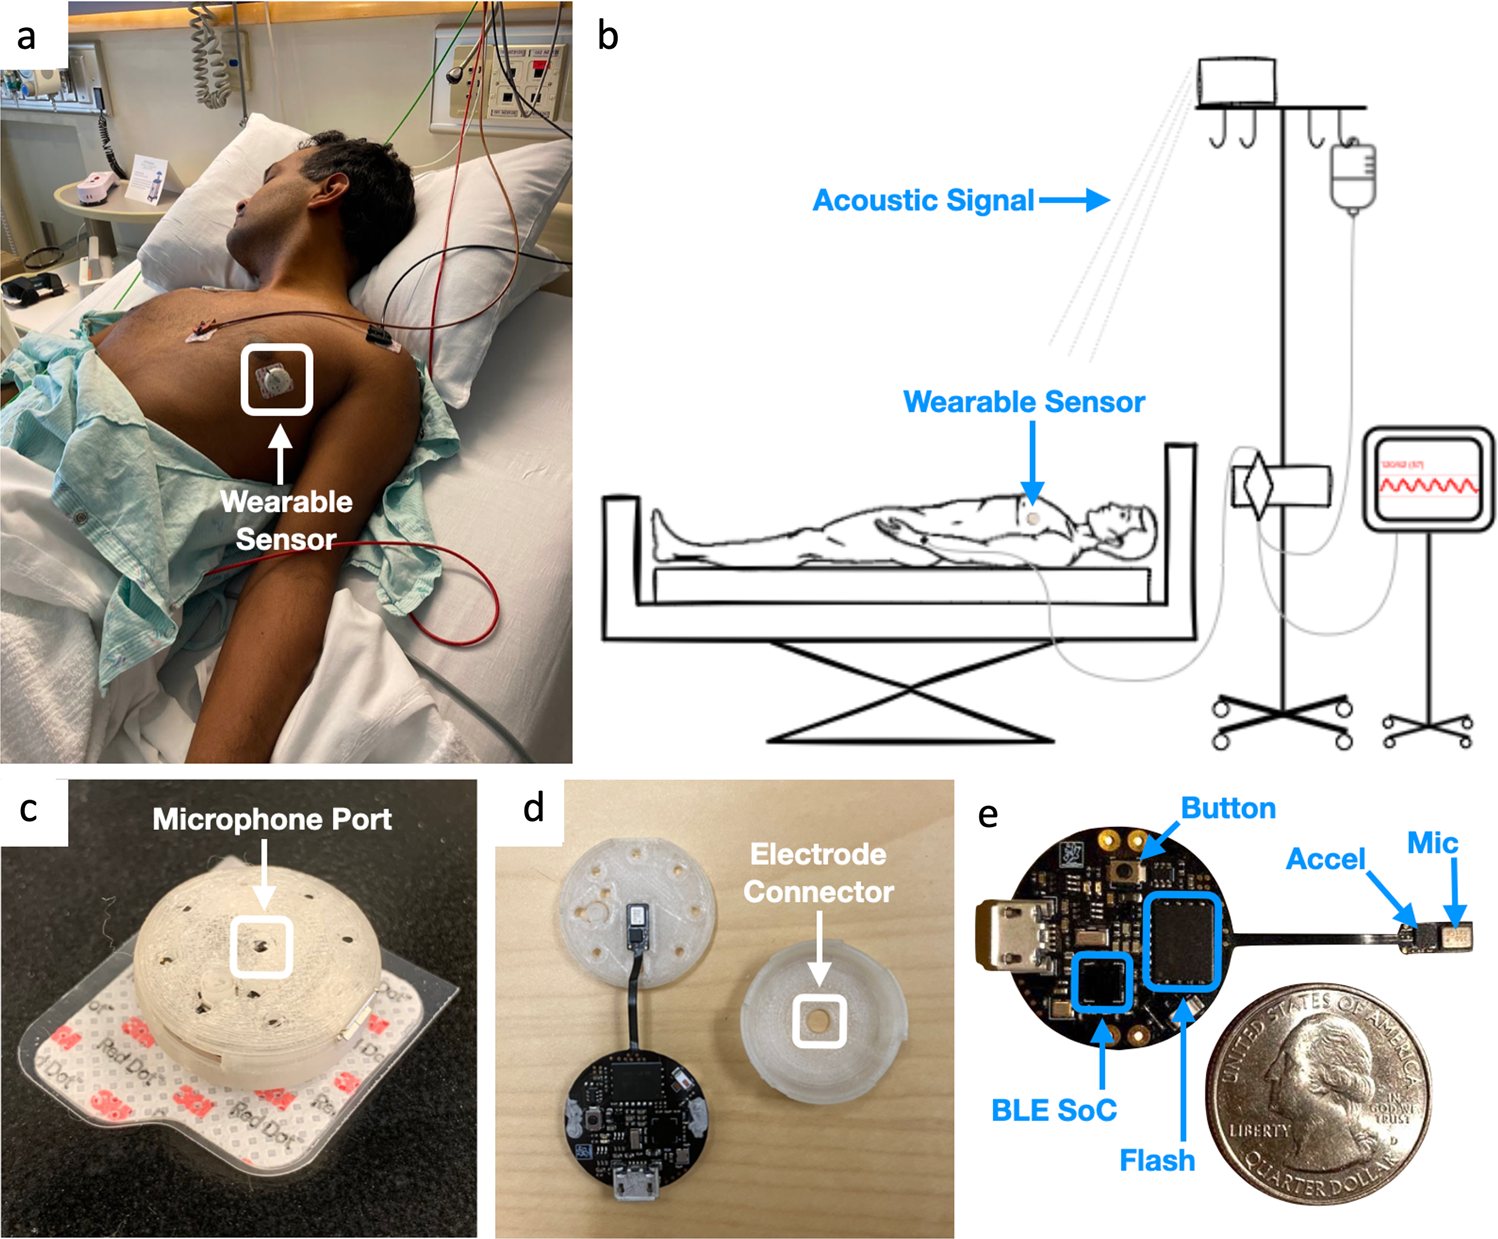 A Low-power wearable acoustic device for accurate invasive arterial  pressure monitoring | Communications Medicine